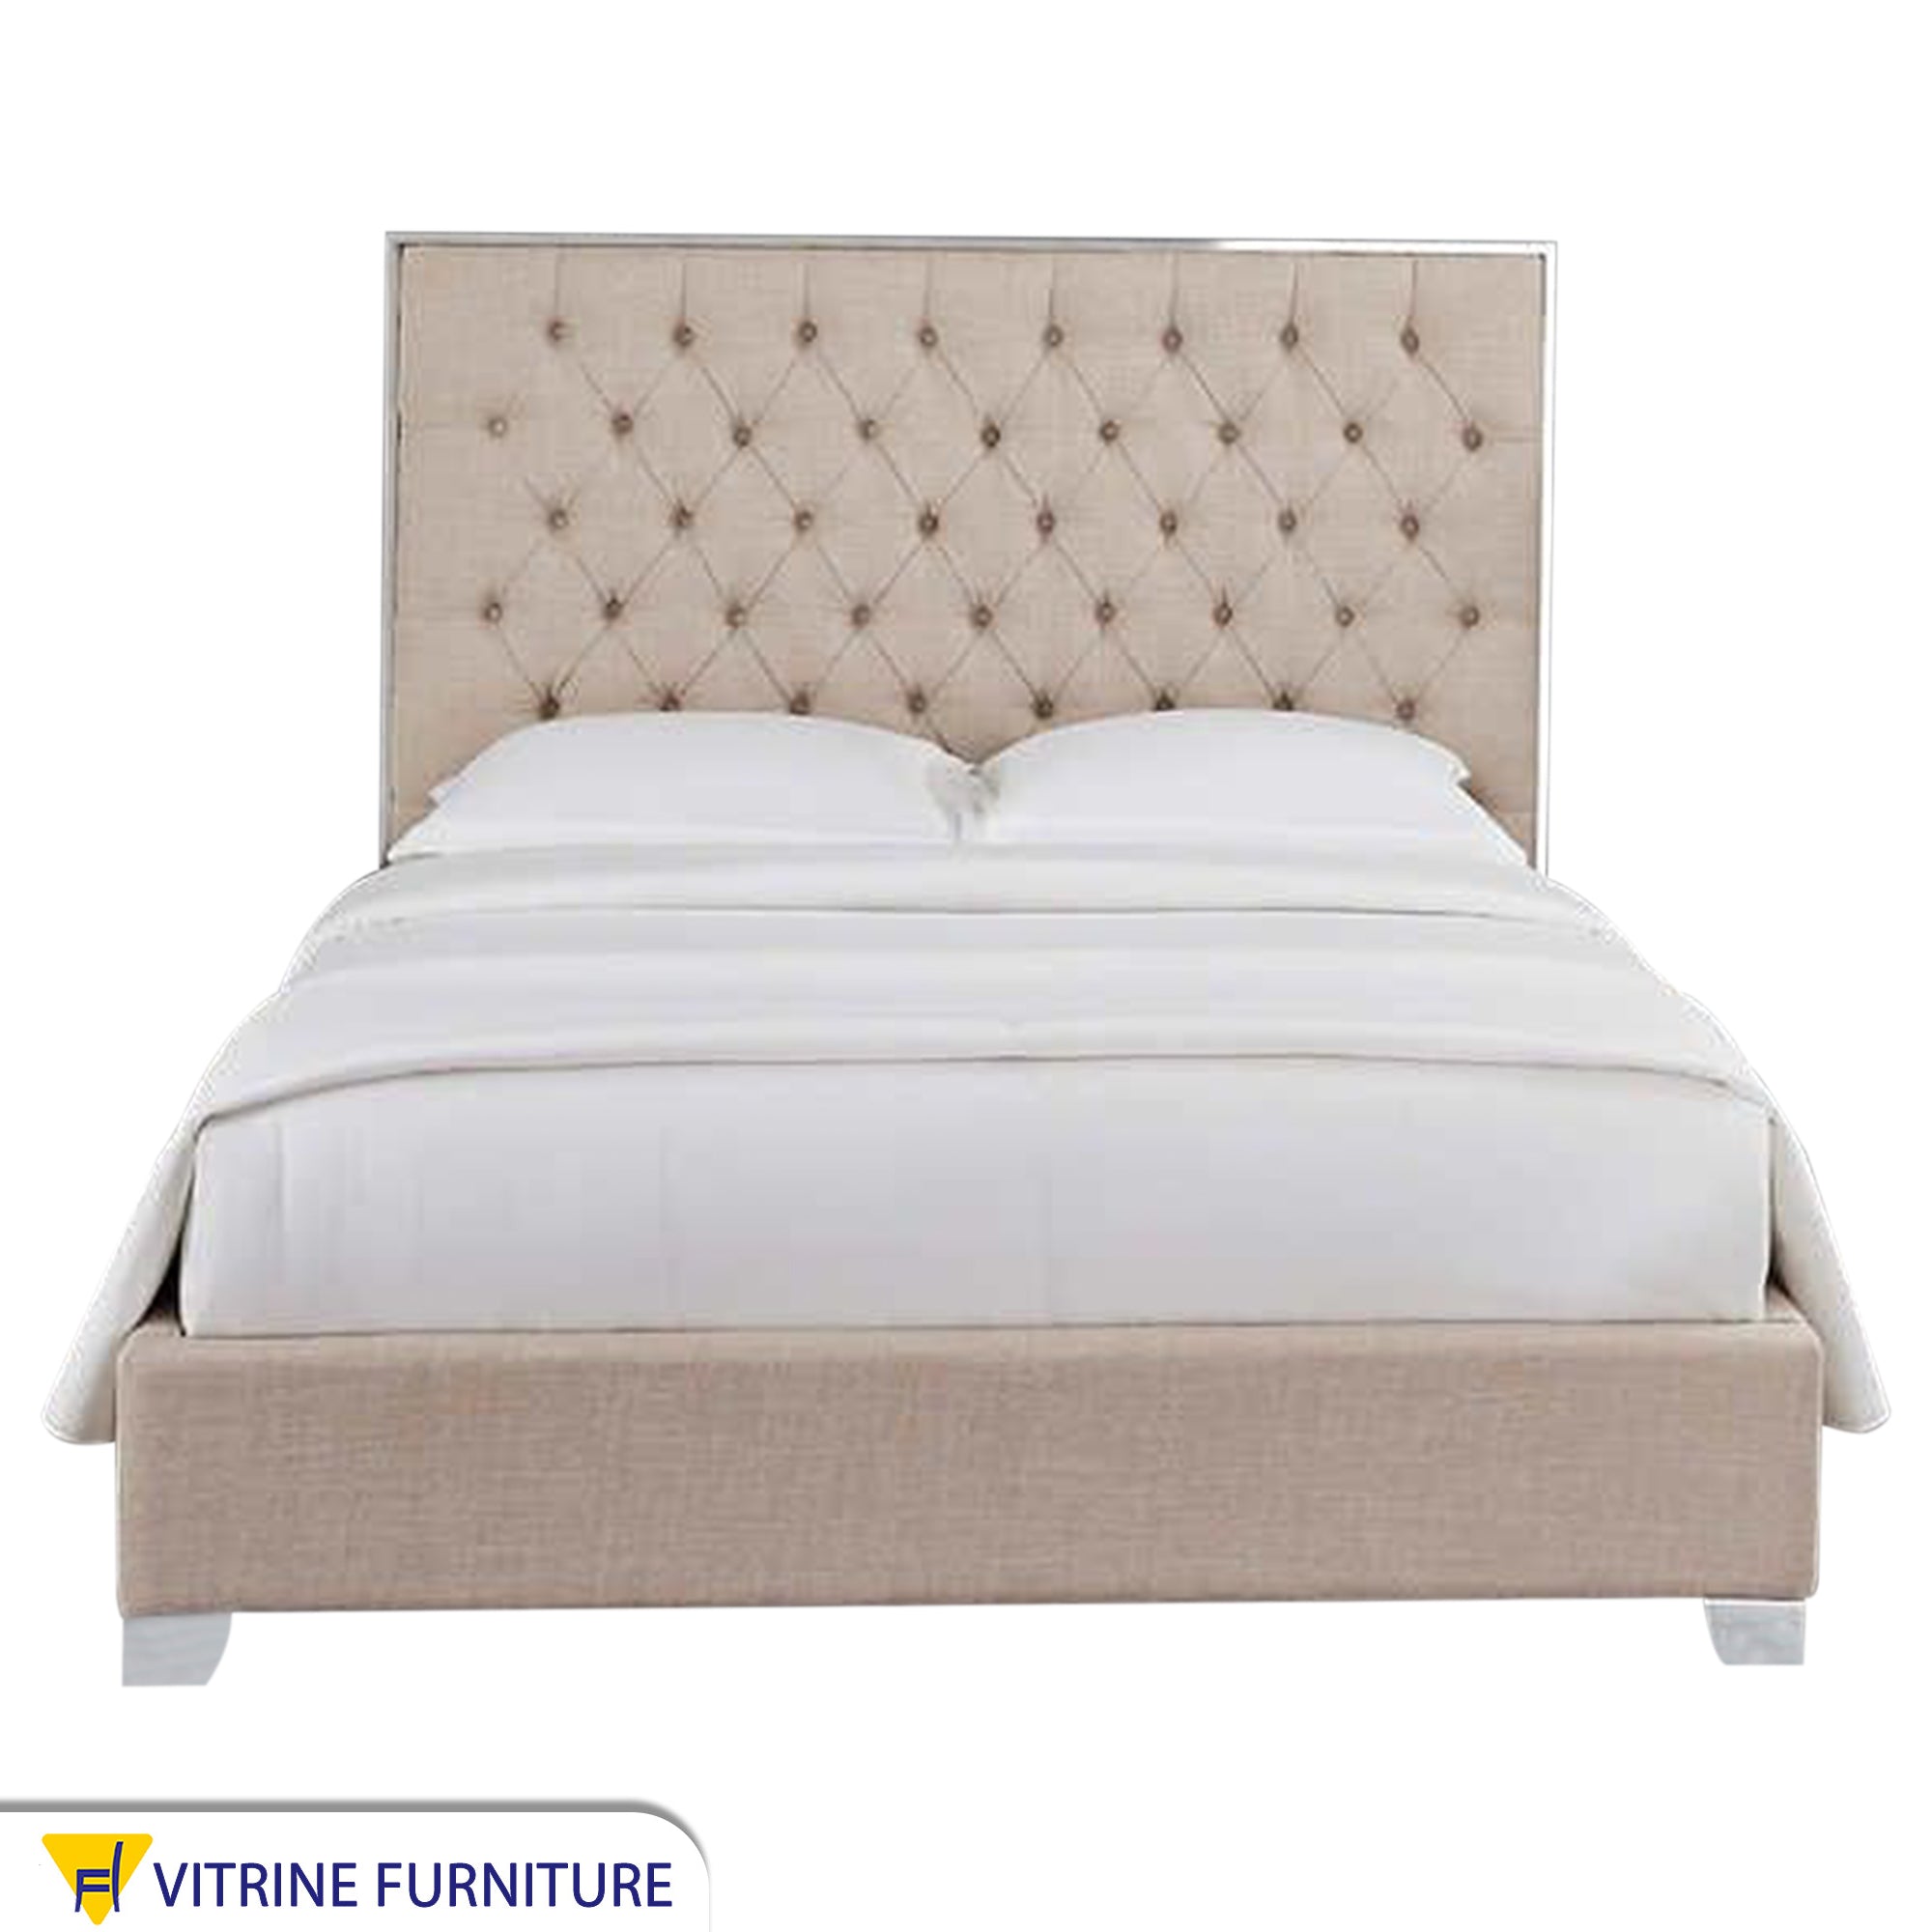 Beige bed with Capoutine upholstery